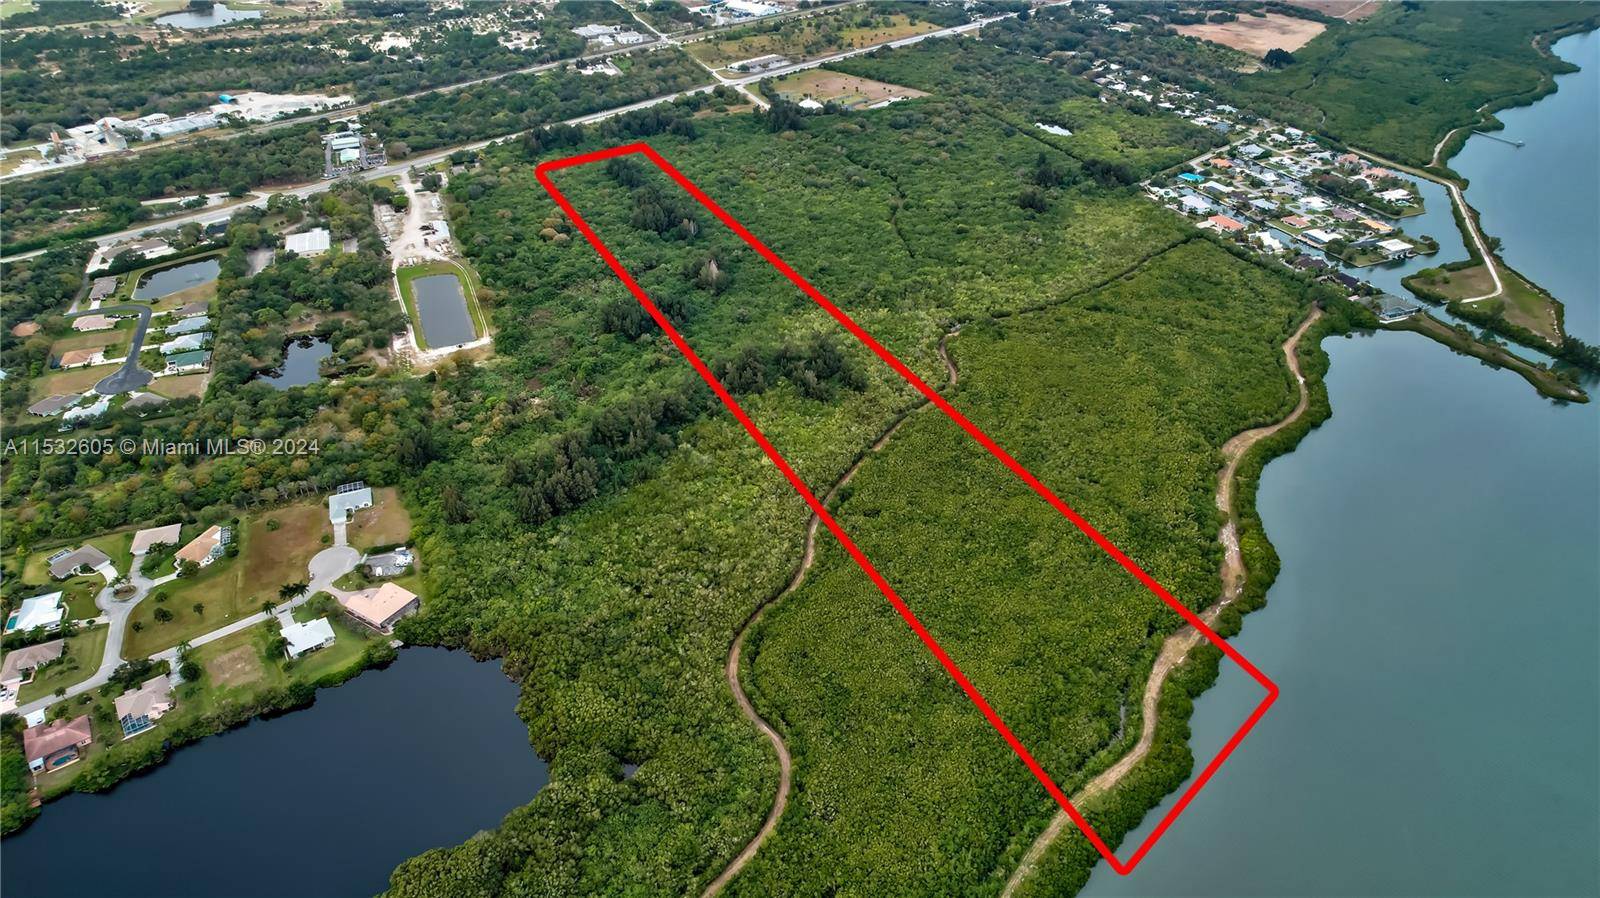 THIS RESIDENTIAL 10 ACRES LAND IS A GREAT OPPORTUNITY TO DEVELOP 30 SINGLE FAMILY HOMES WITH A BOARDWALK AND A FEW DOCKS.